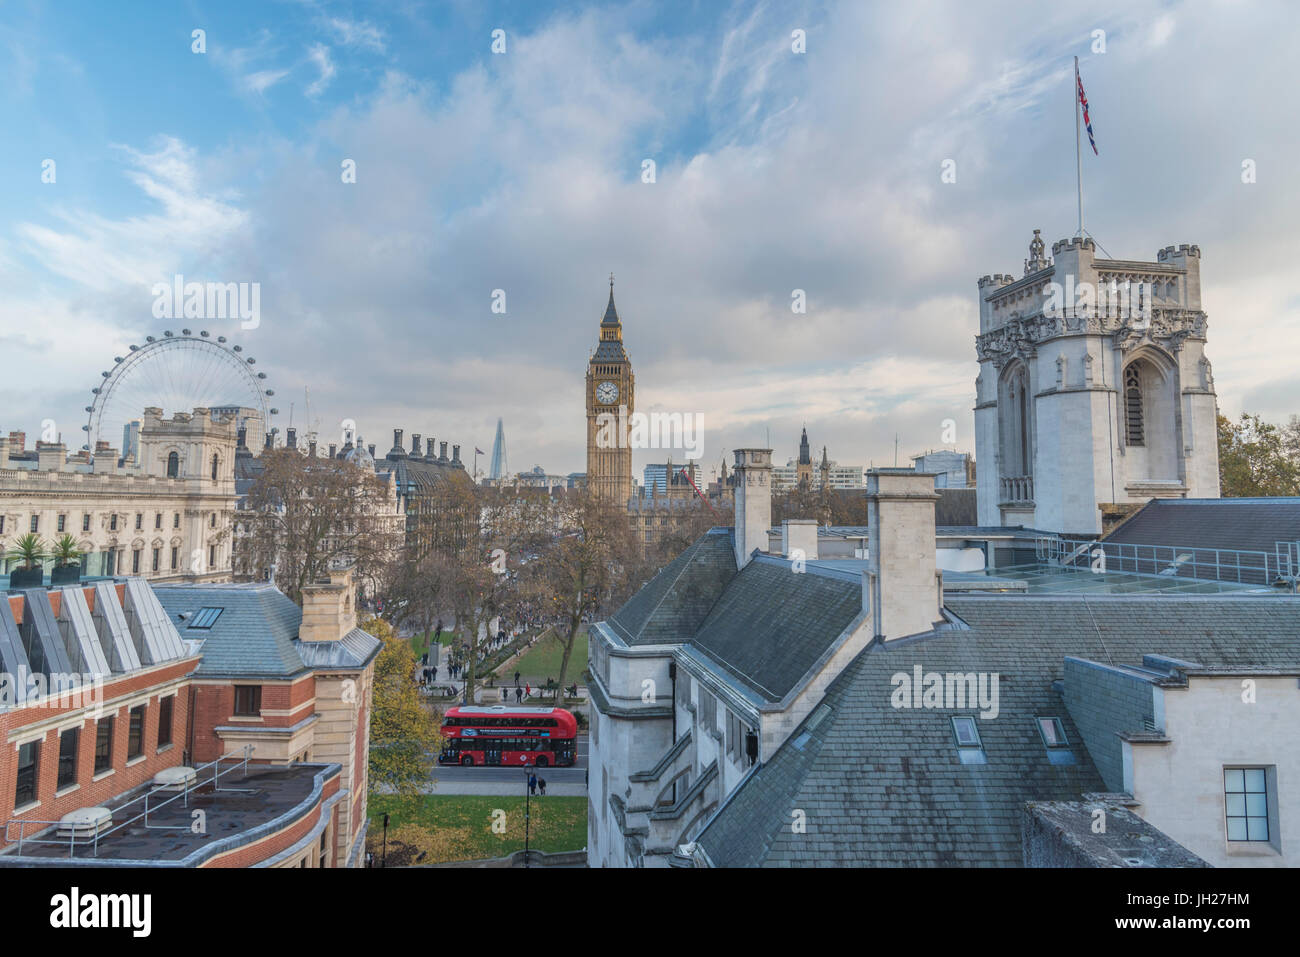 A London bus navigating Westminster with a beautiful blue sky above, London, England, United Kingdom, Europe Stock Photo